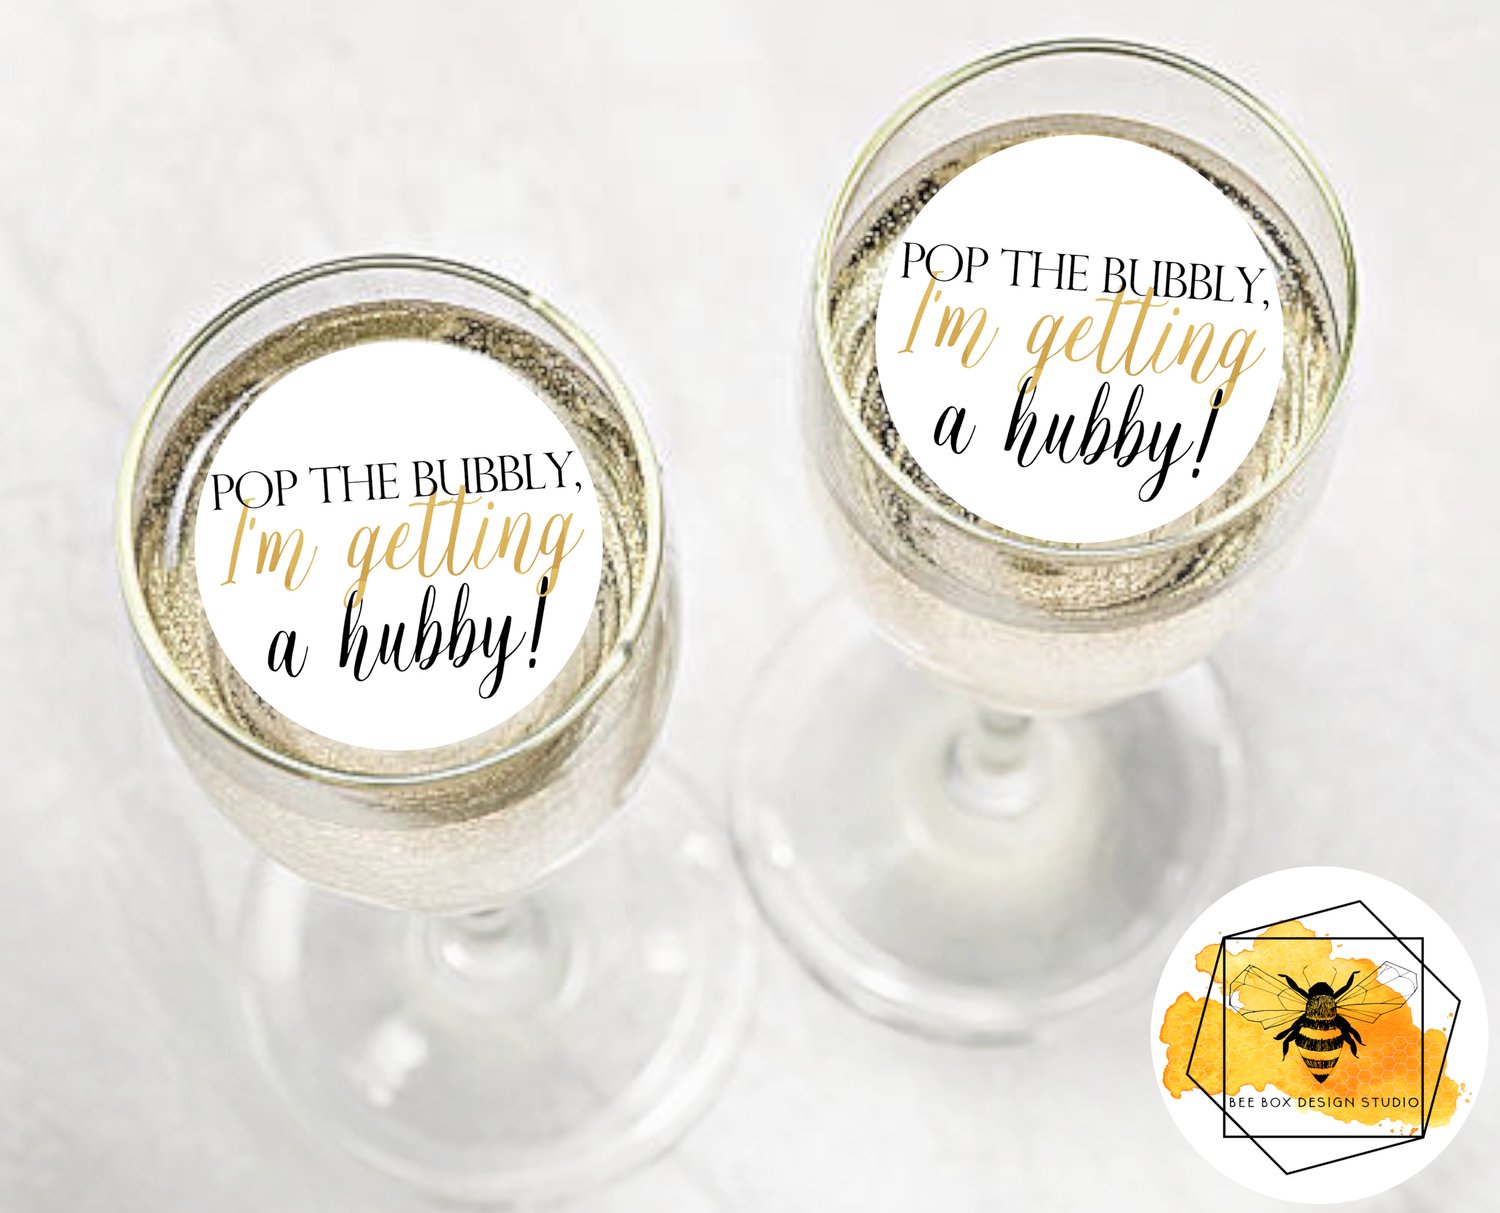 Edible Pop the Bubbly! Drink Toppers — Bee Box Design Studio